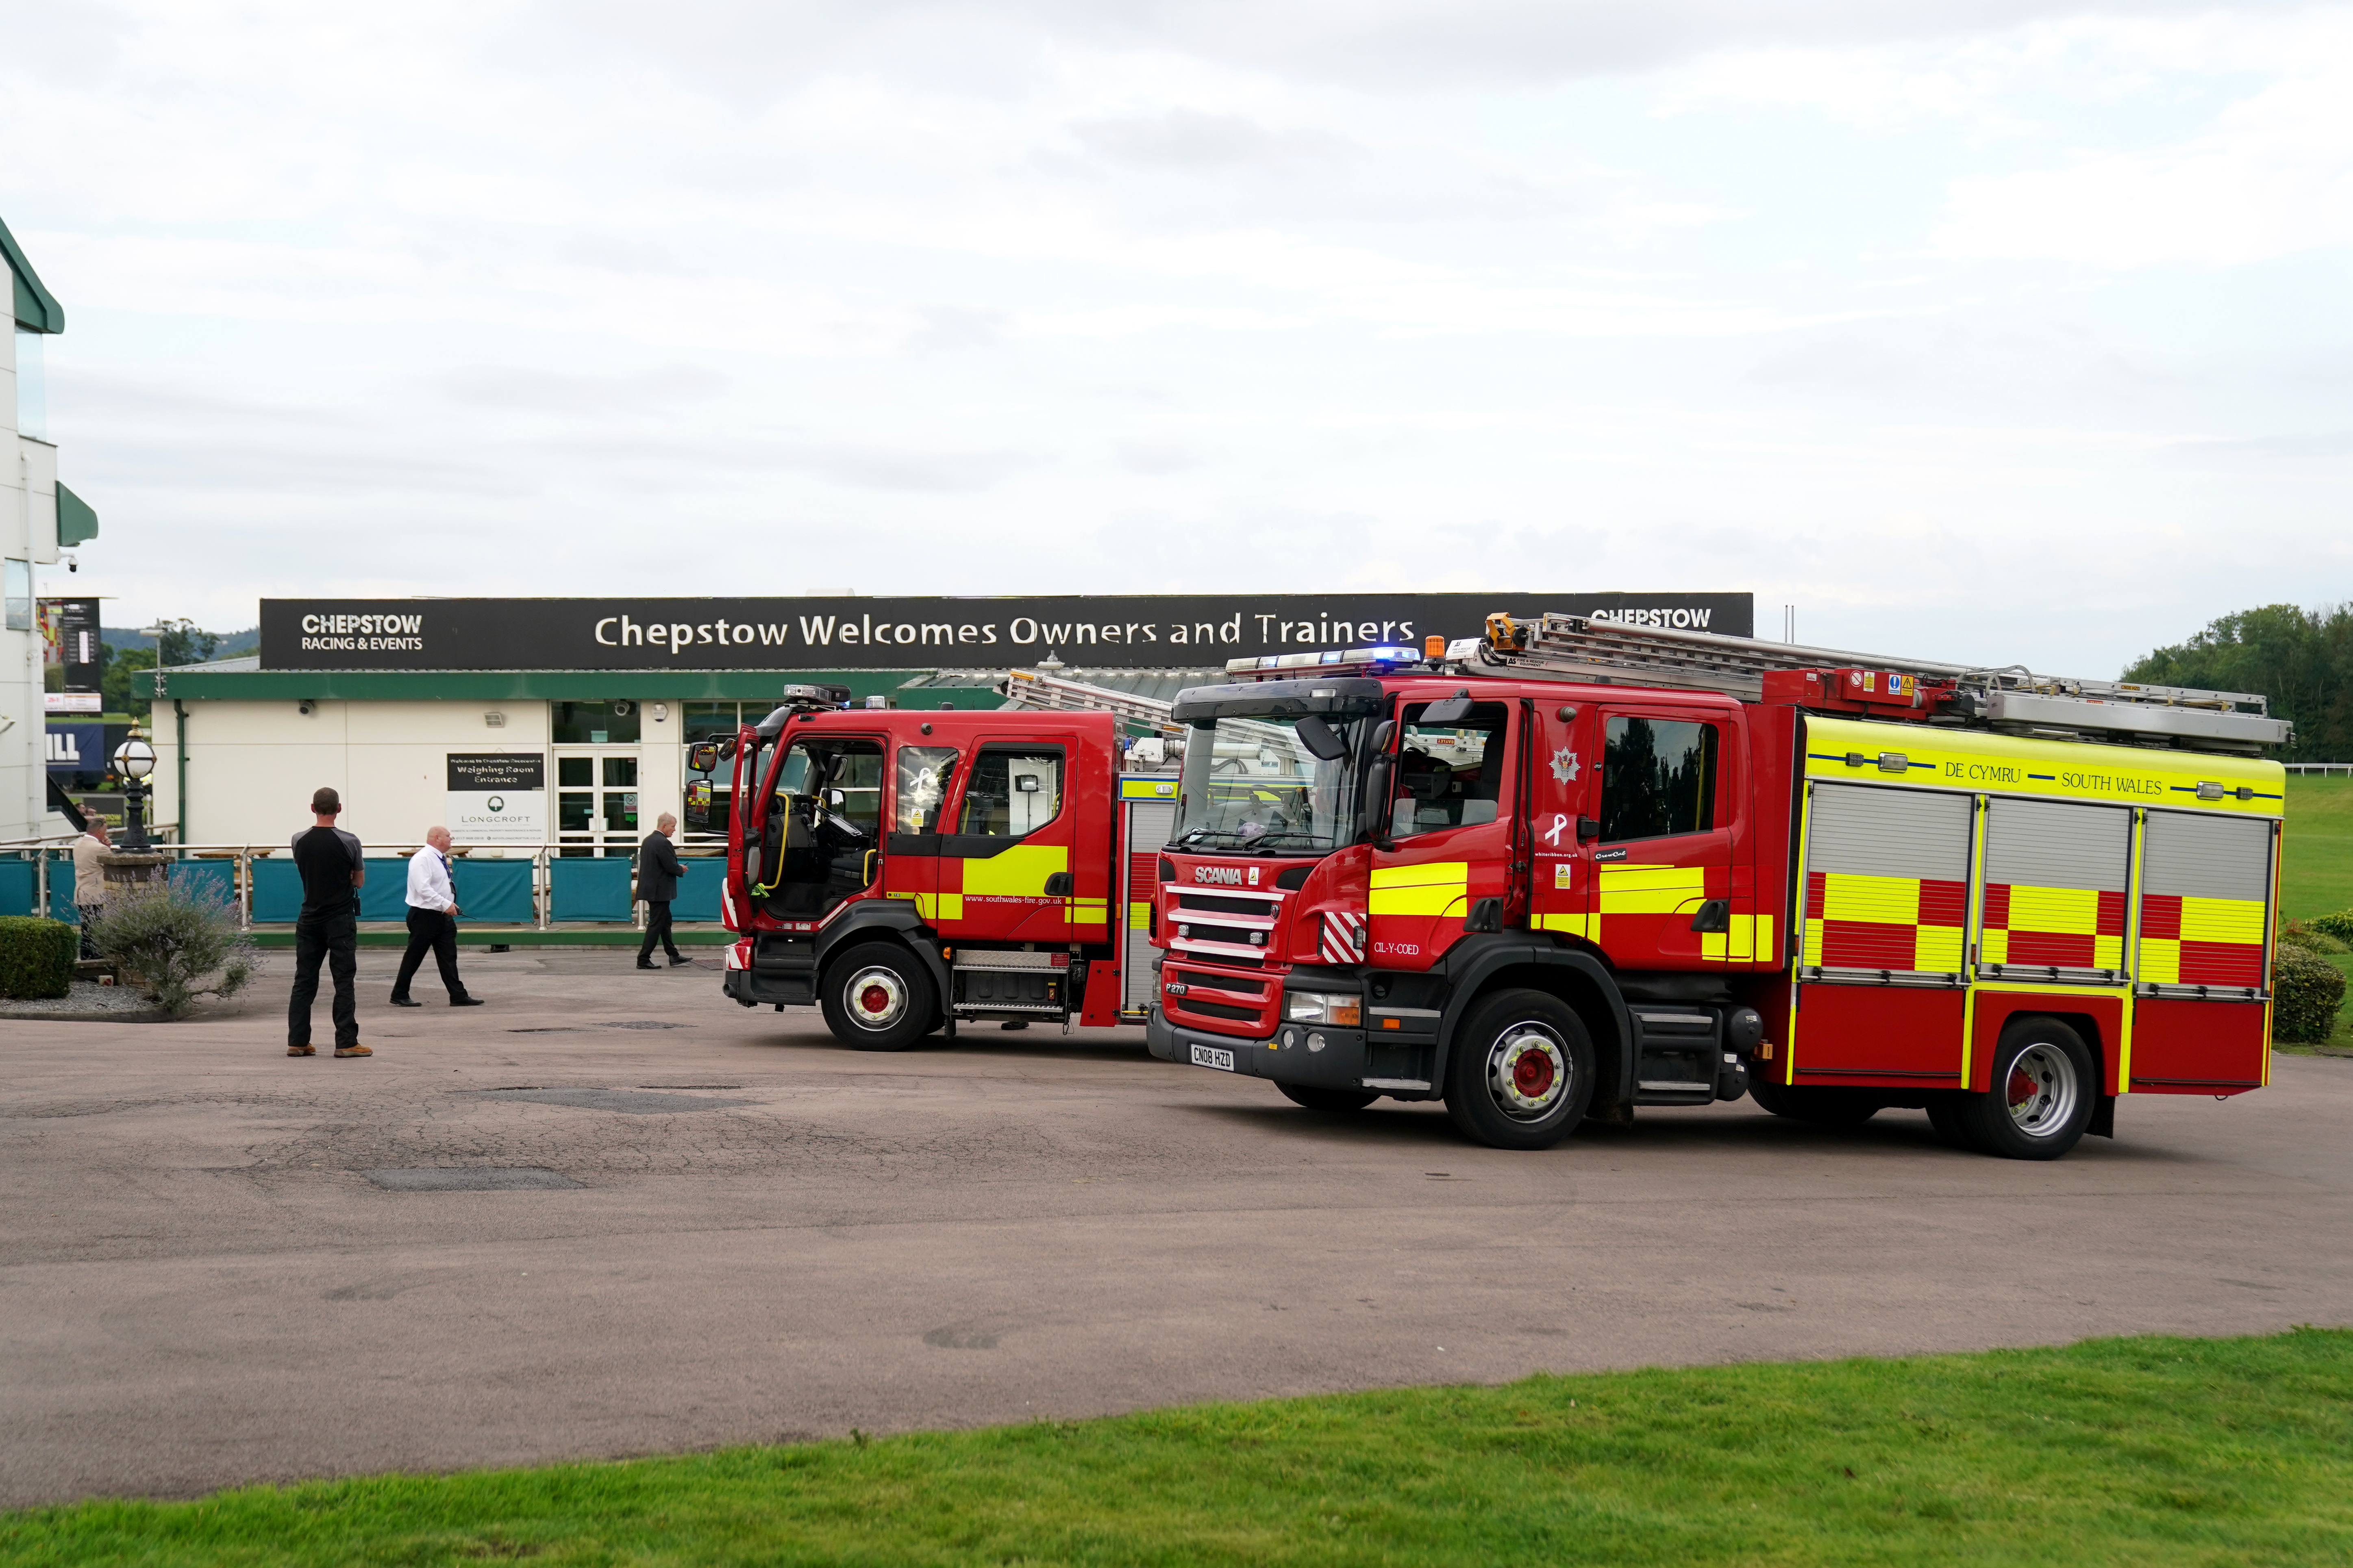 Fire engines arriving at the course due to a fire